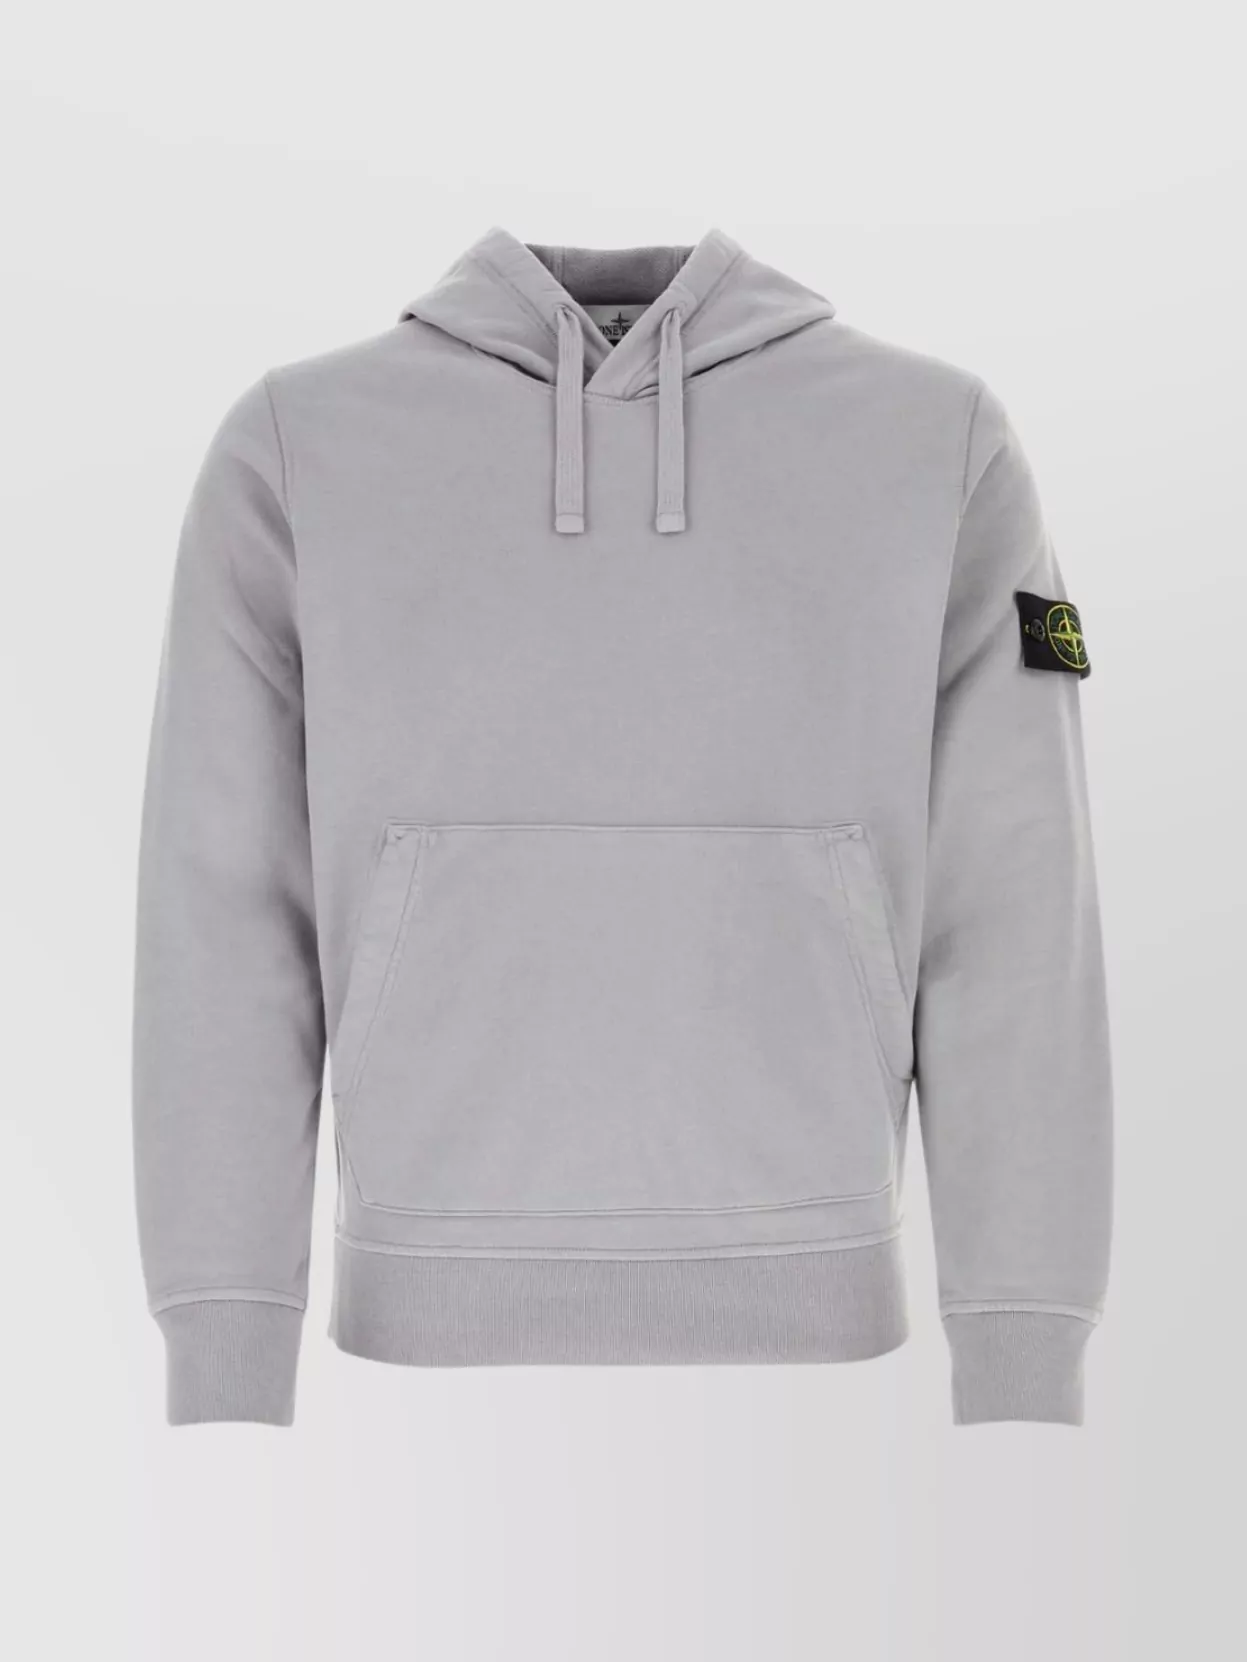 Stone Island Cotton Sweatshirt With Front Pouch Pocket In Gray